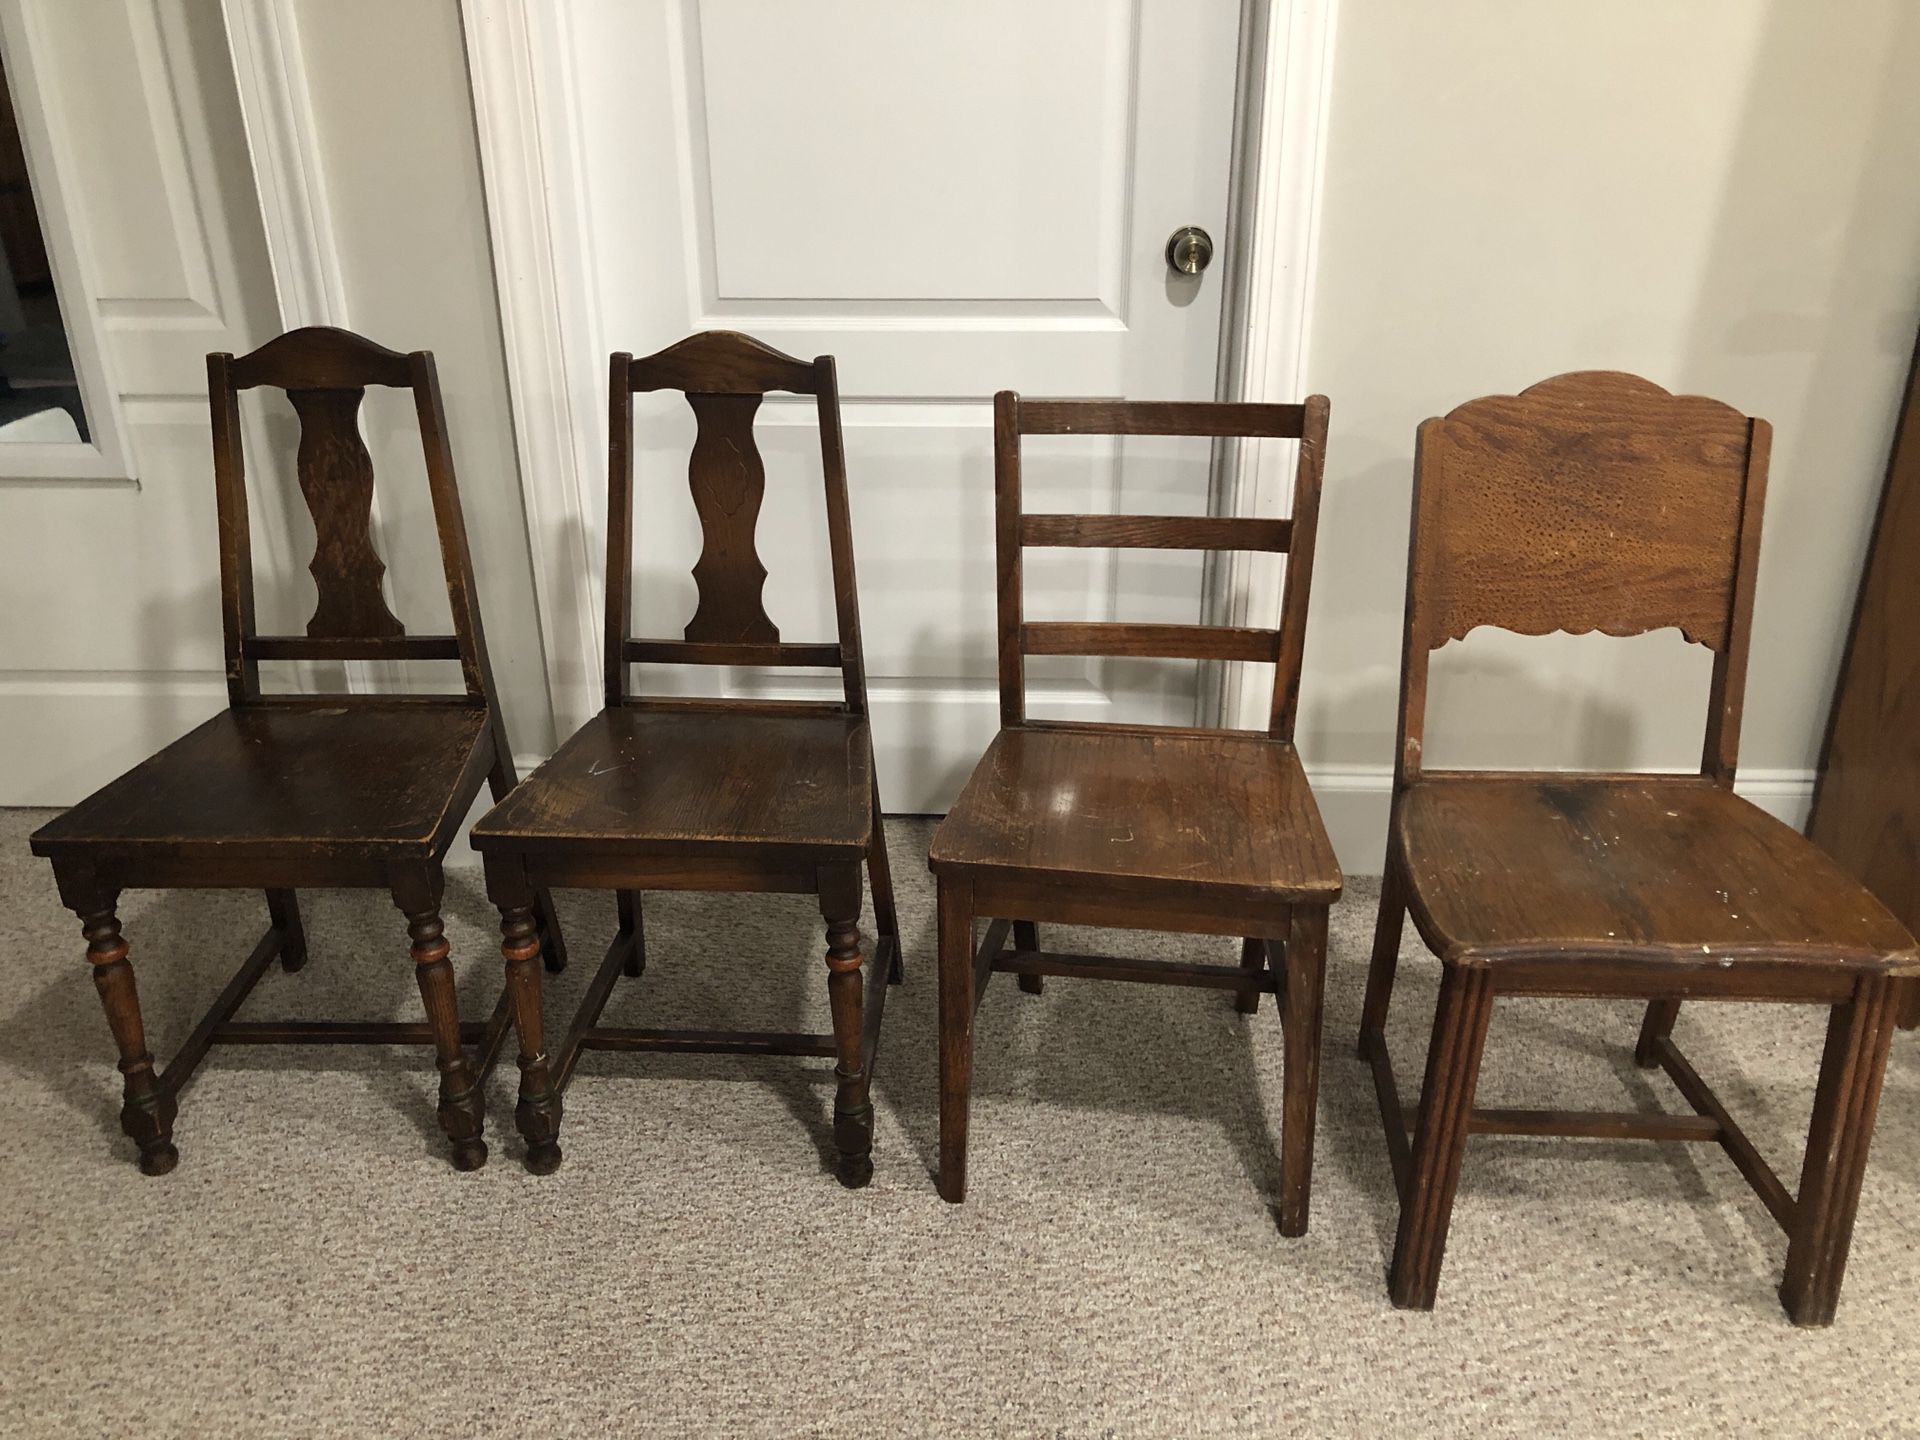 Solid Wood Chairs - dining, kitchen or desk